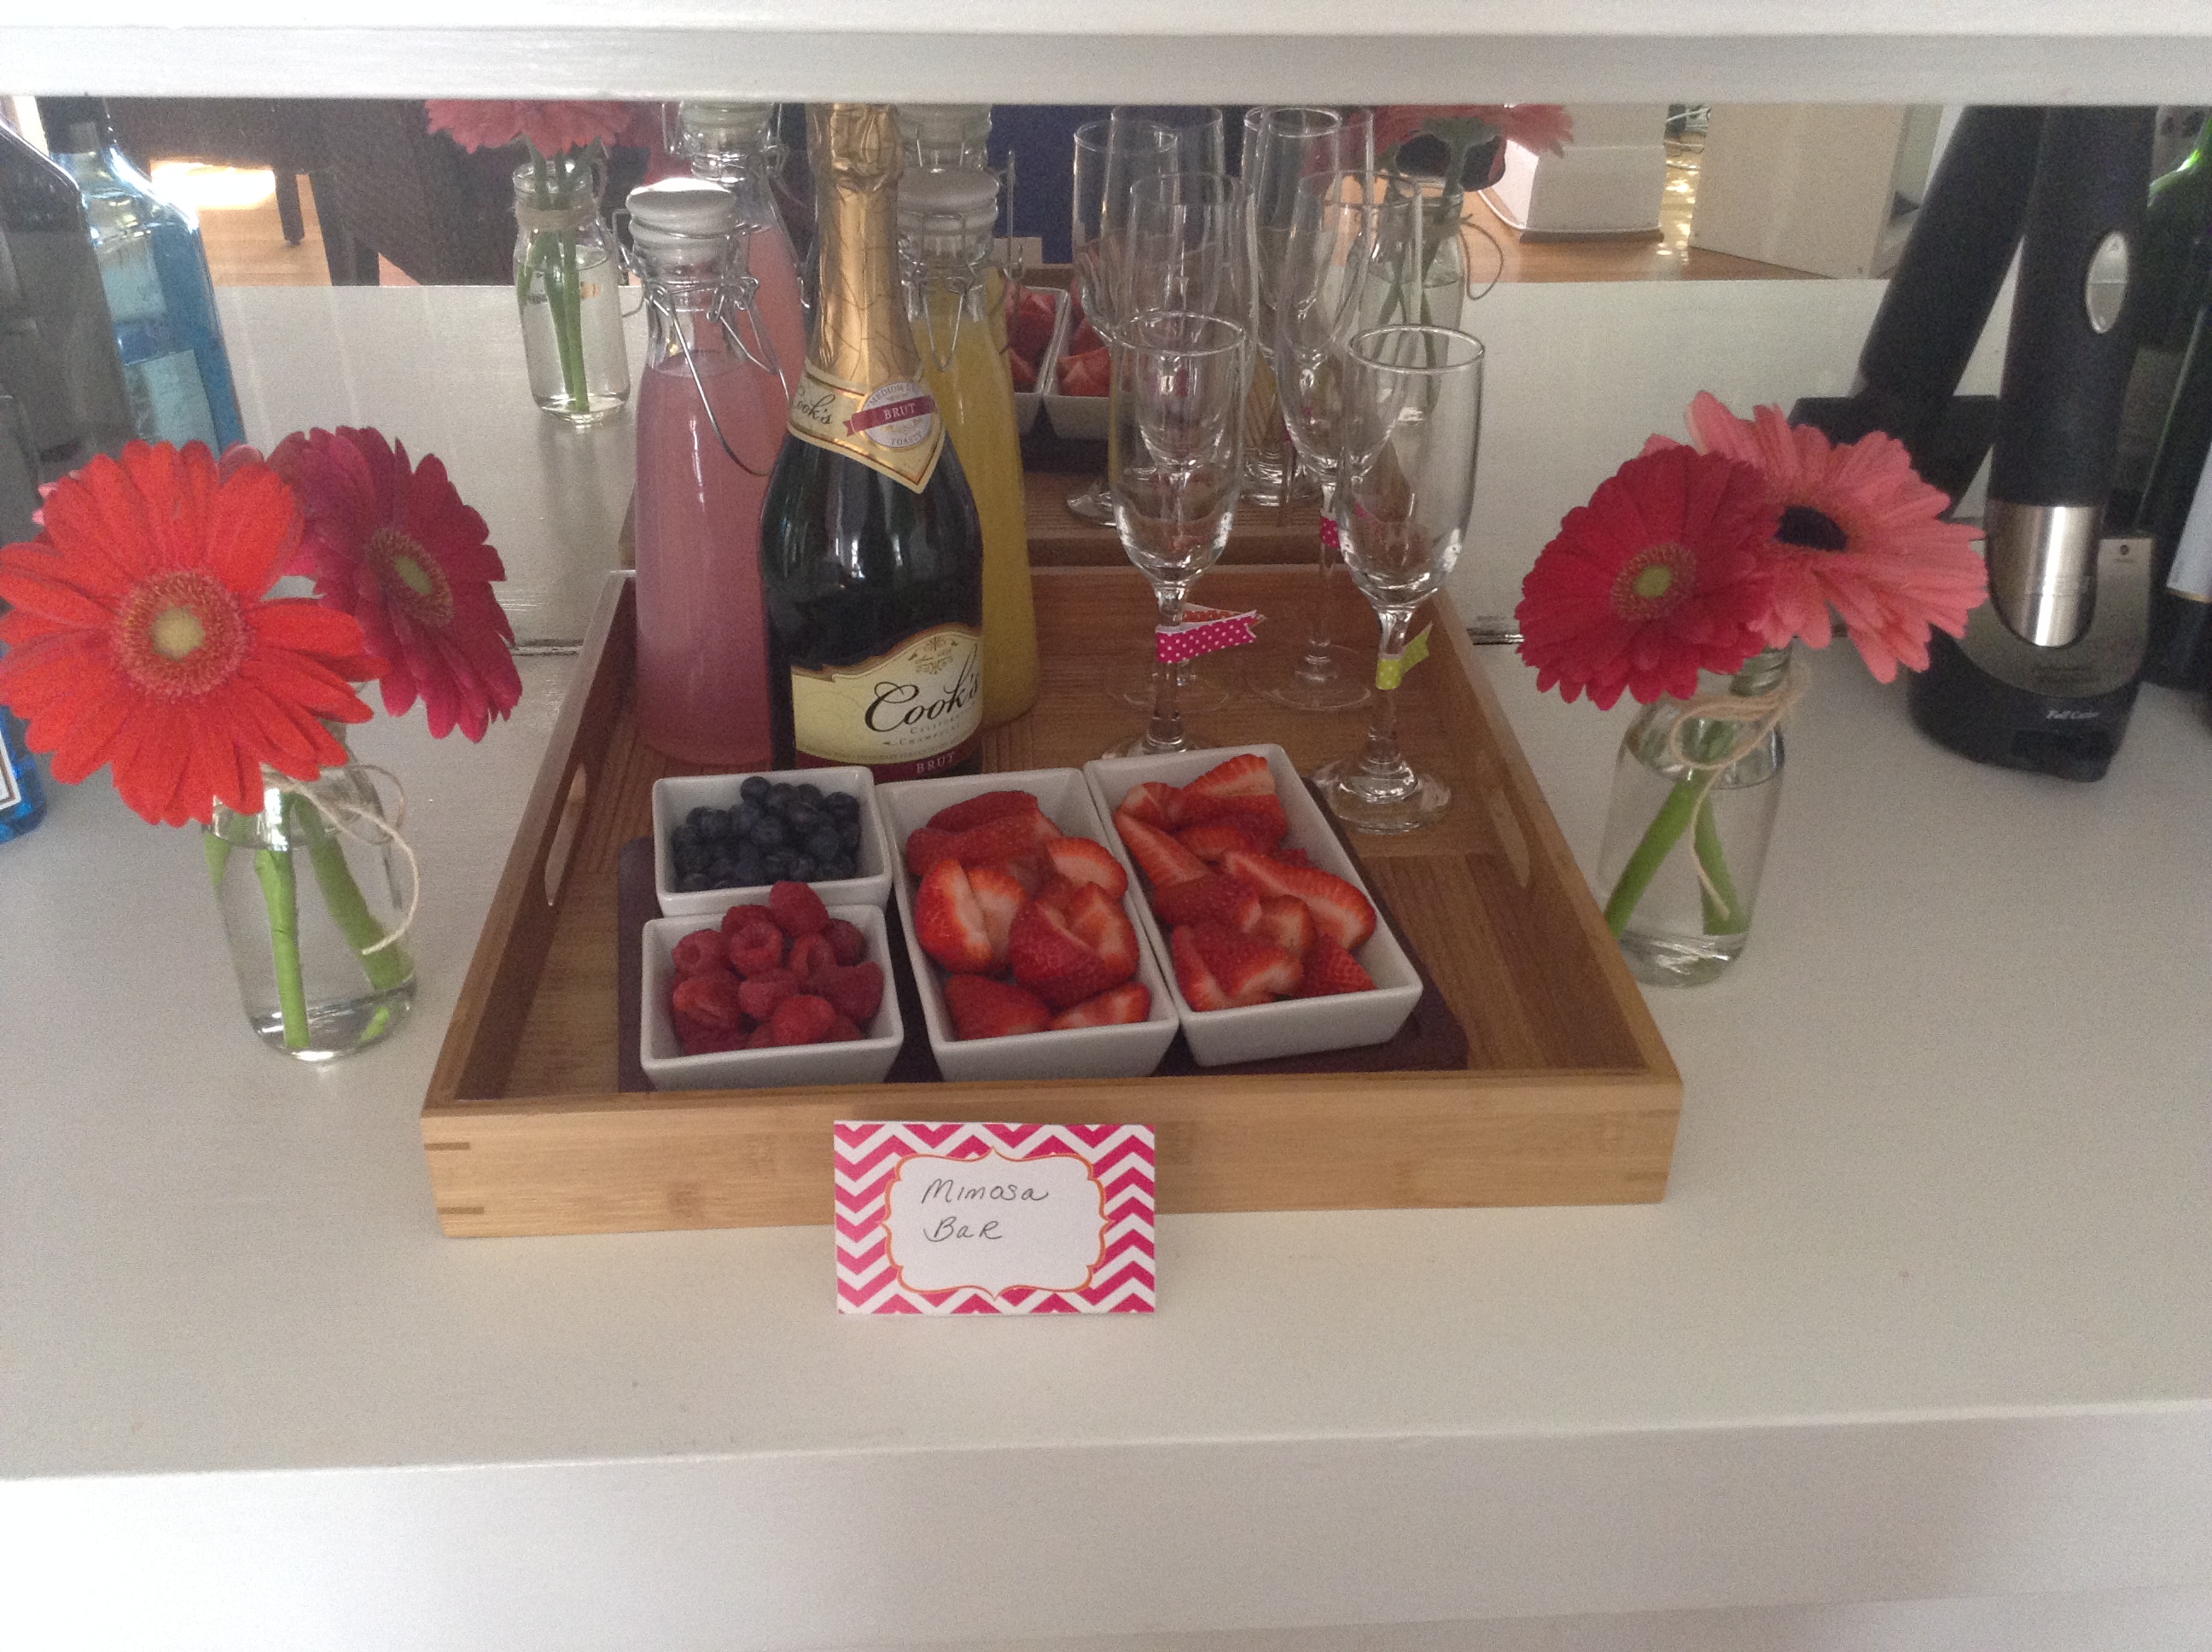 My mom loves a good mimosa at brunch, so I brought the mimosa bar to her.